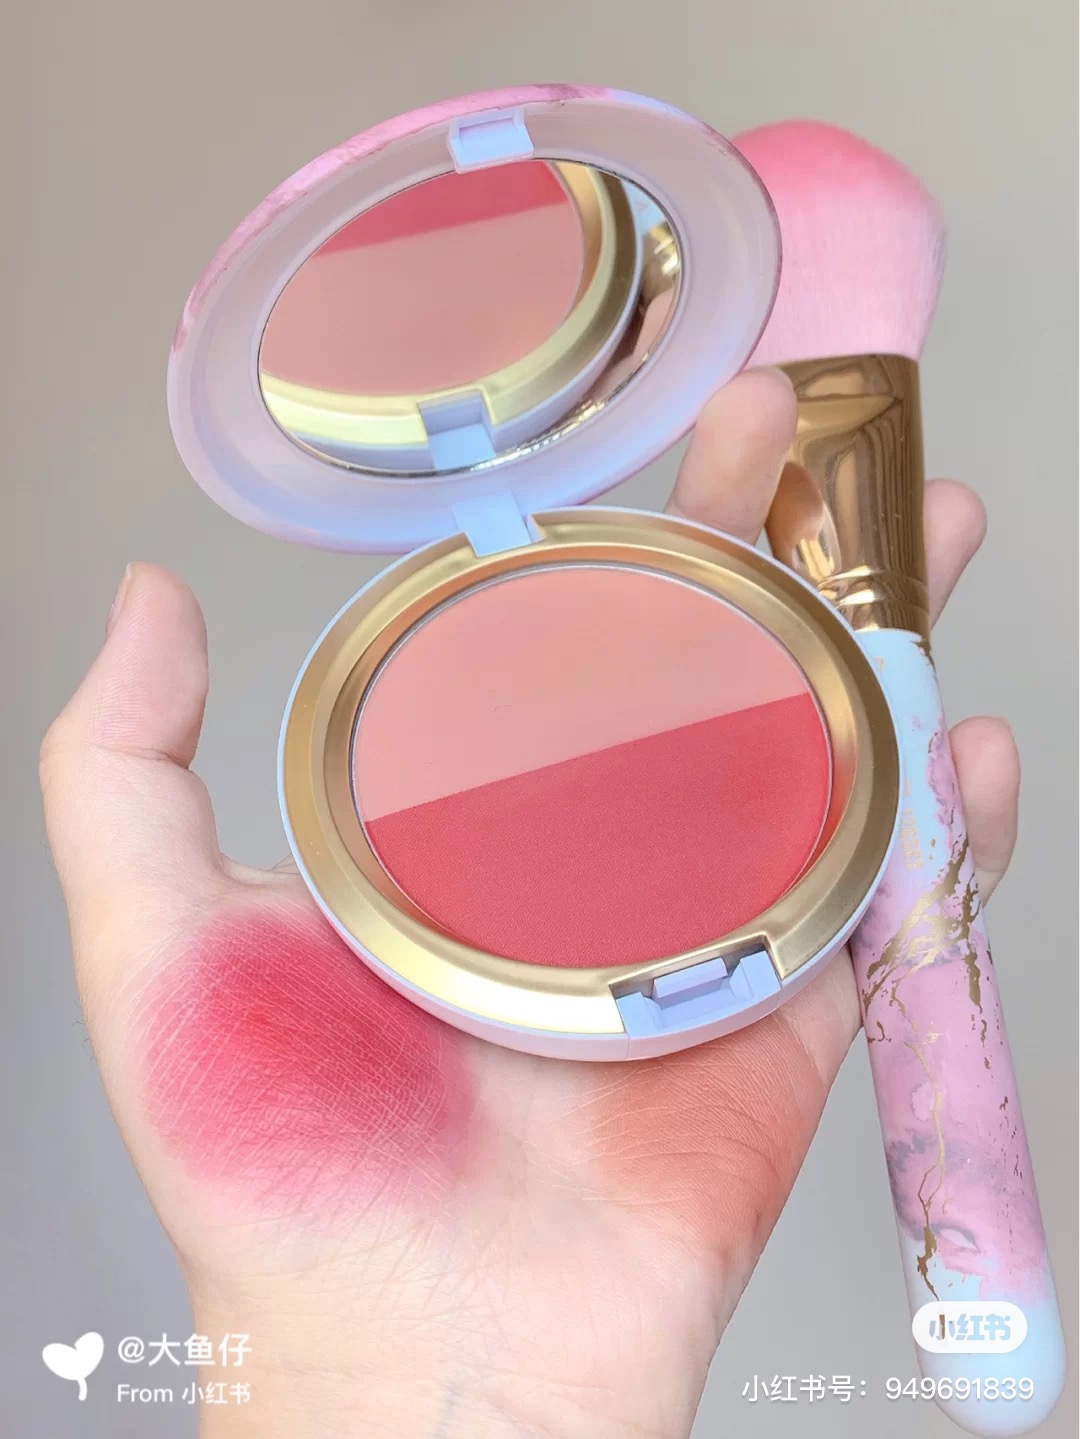 (New Arrival) Limited Edition Mac Brand Two-Tone Blush Blush